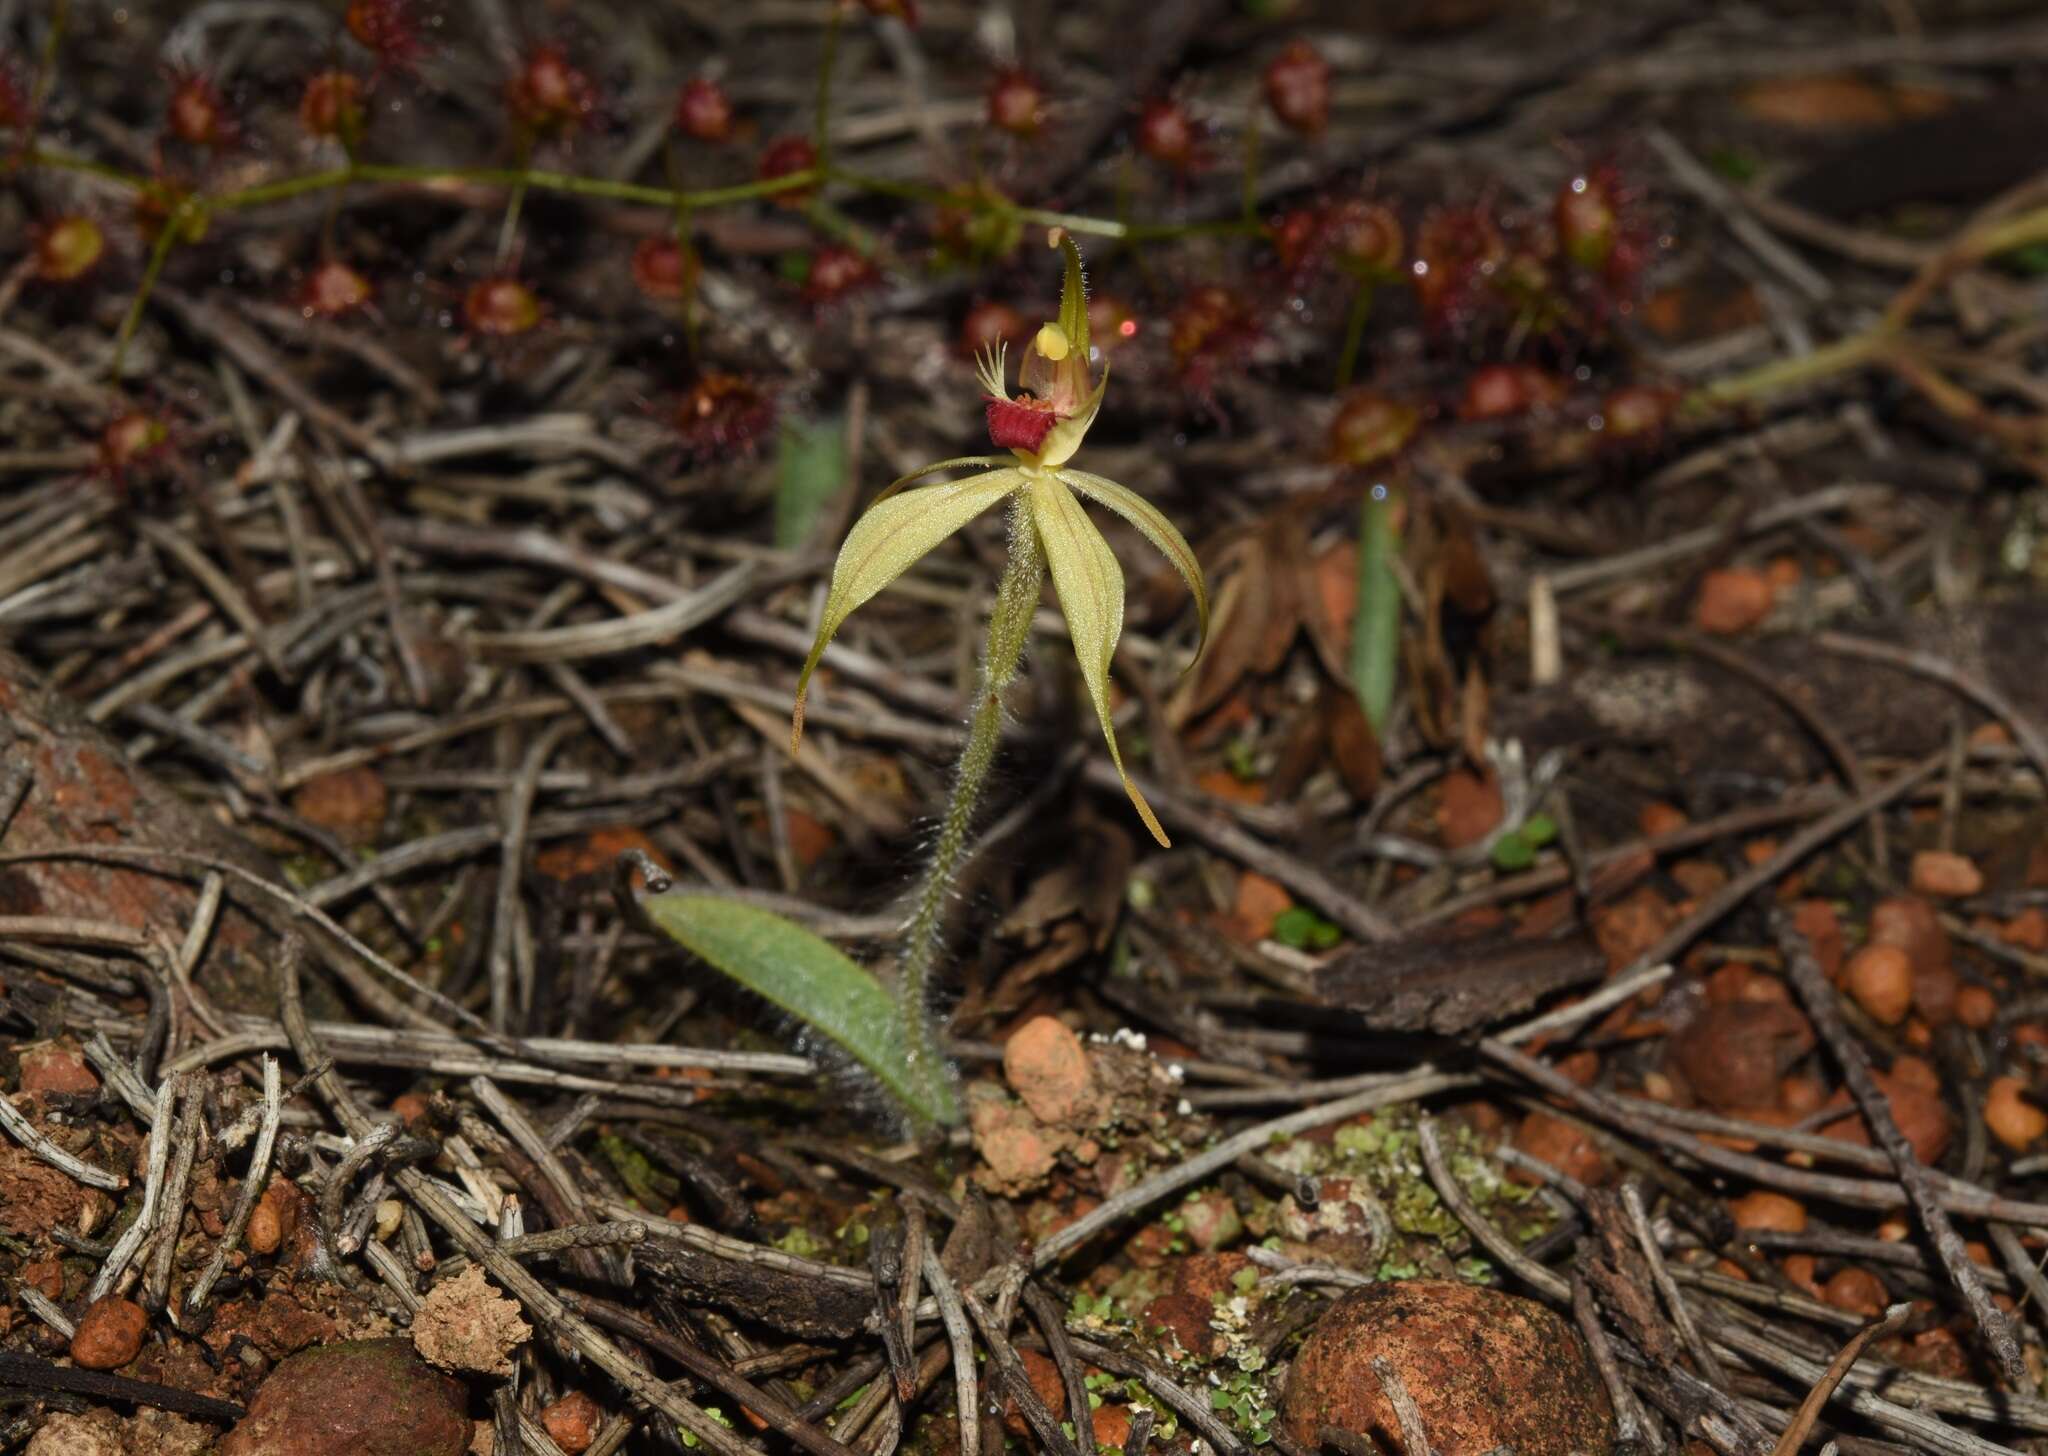 Image of Judy's spider orchid